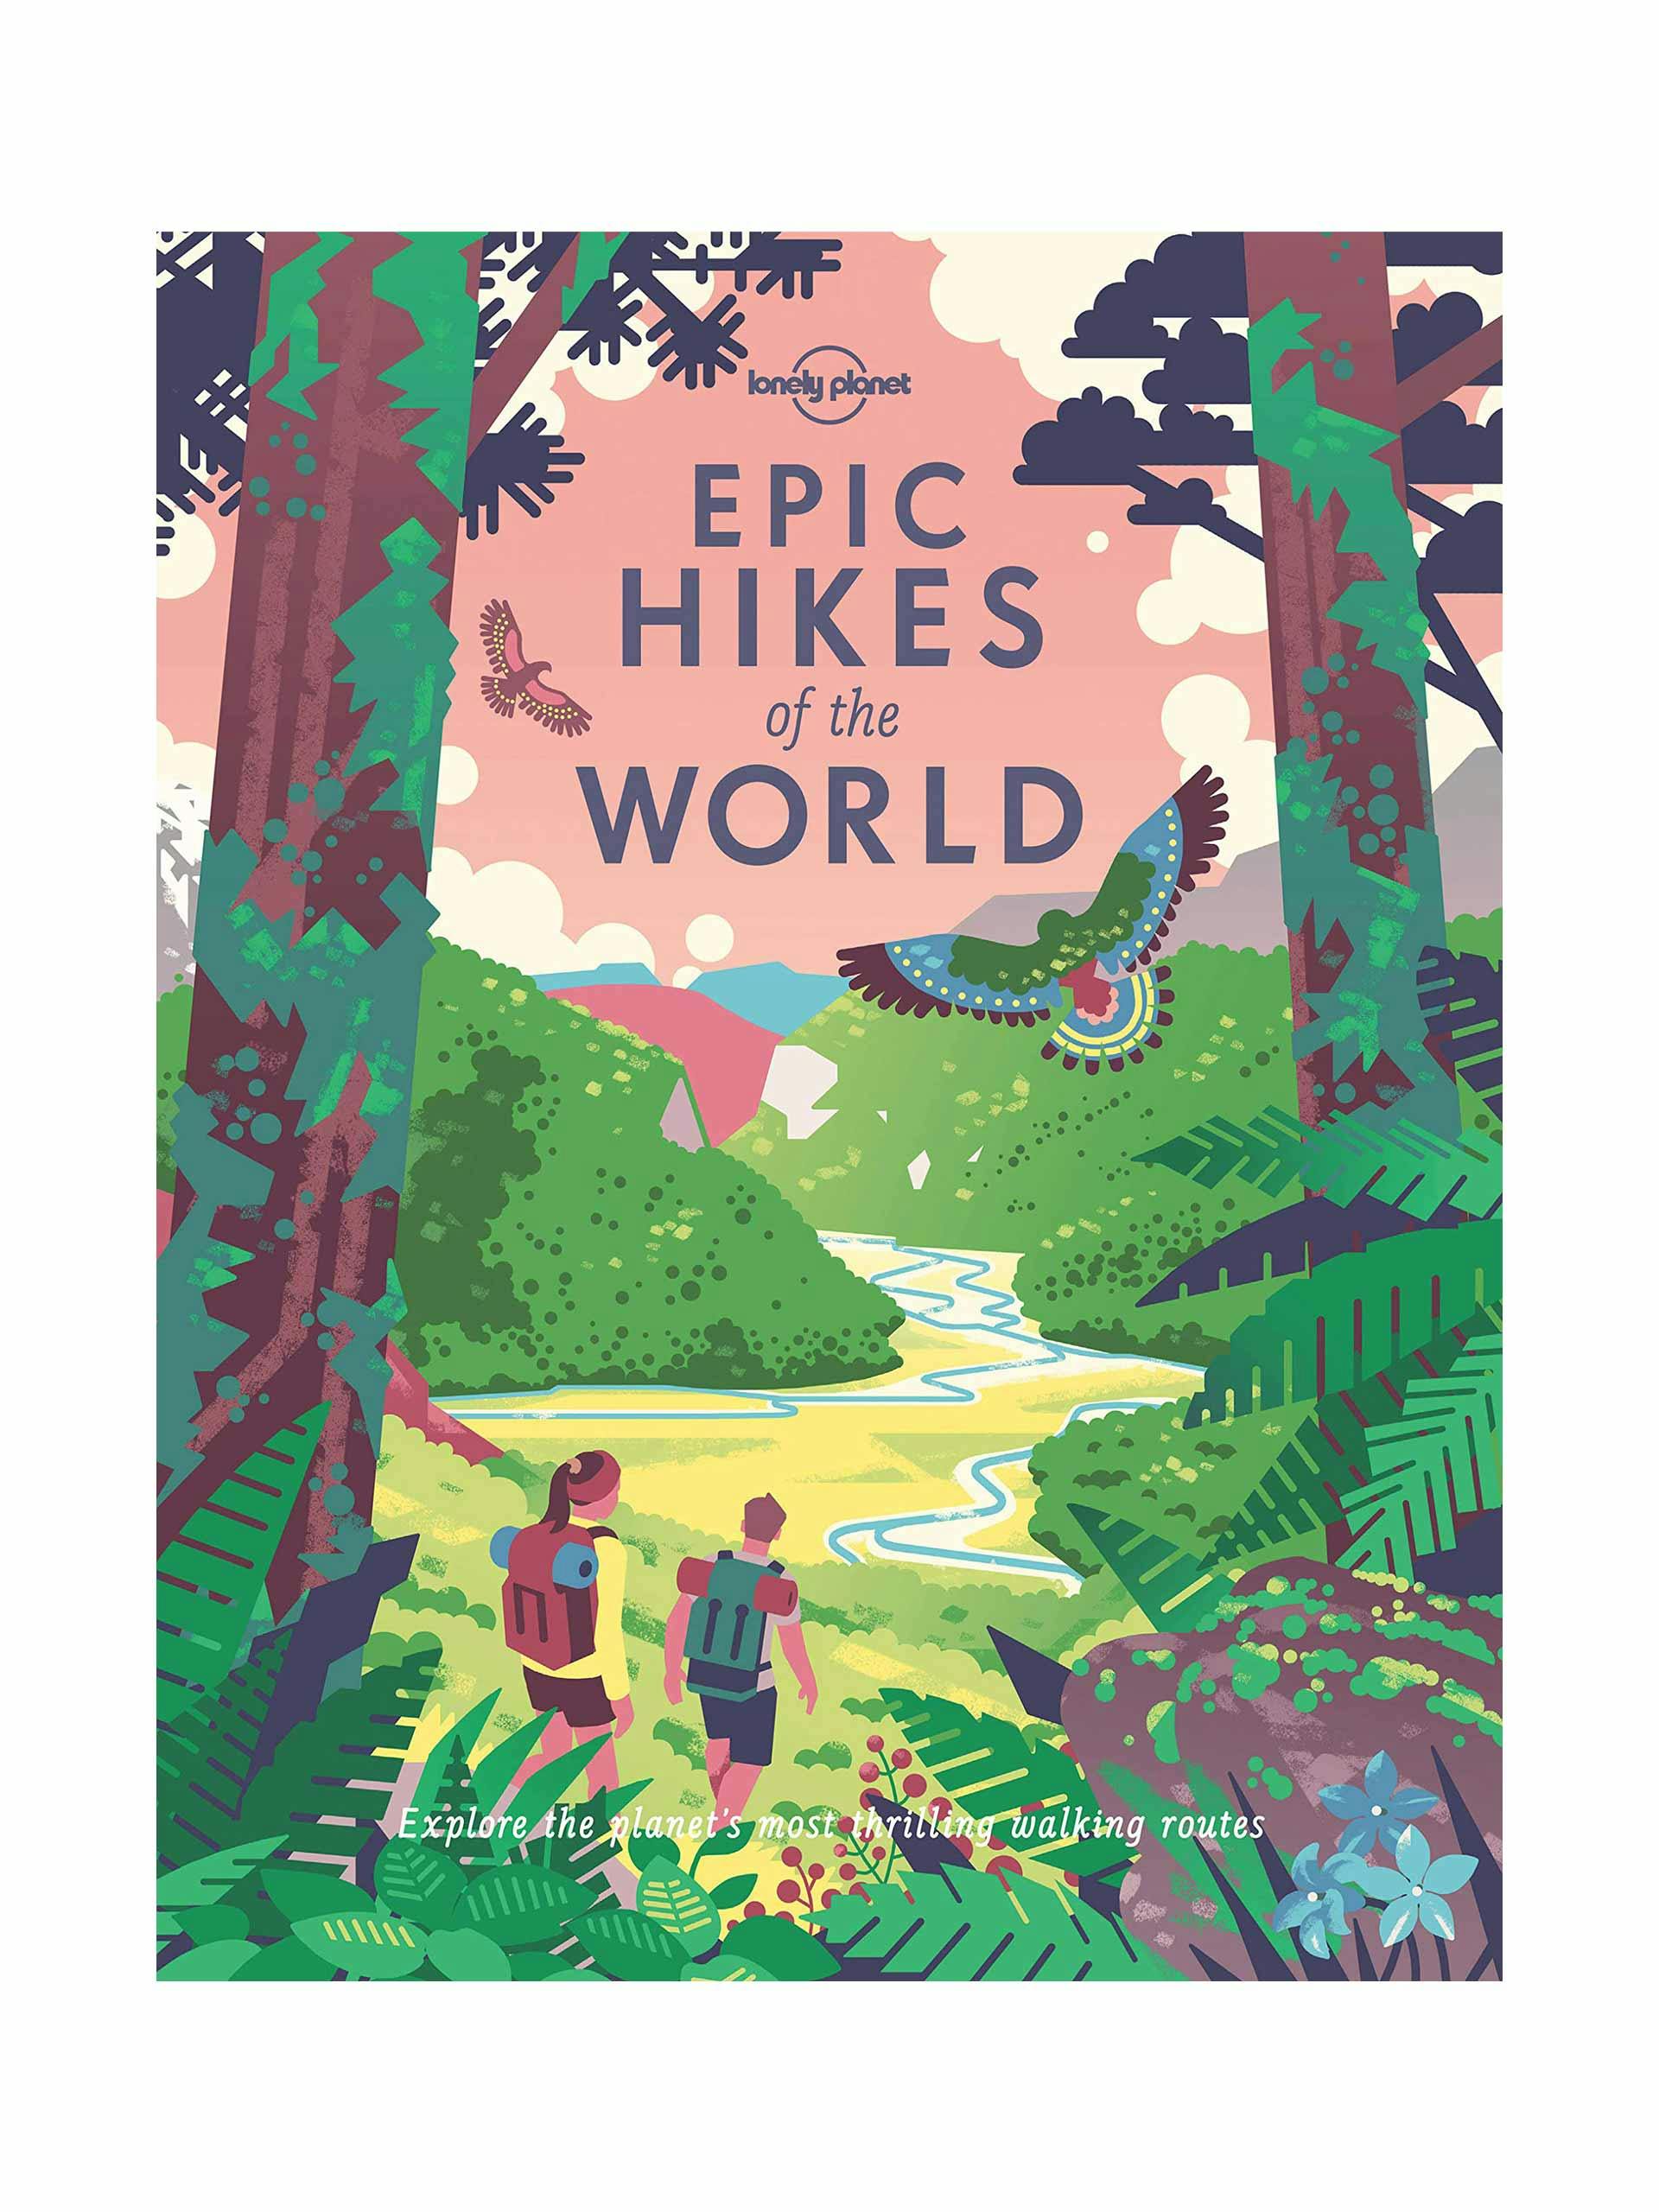 Epic Hikes of the World hardcover book